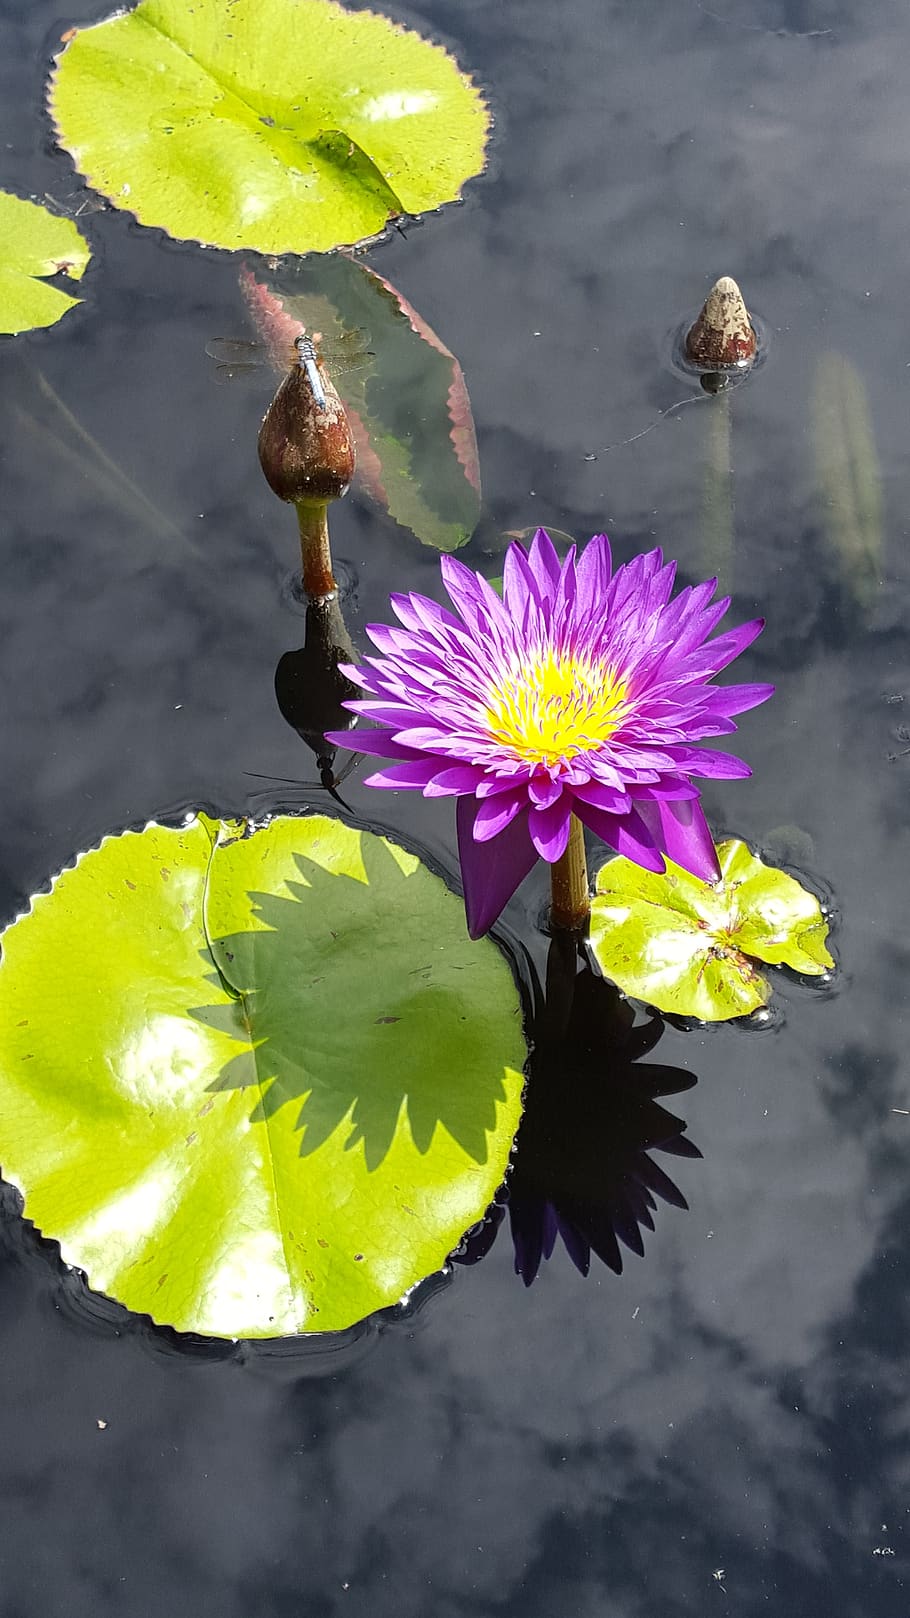 lily pads, flower, pond, water lily, botanical, gardens, flowering plant, fragility, vulnerability, freshness